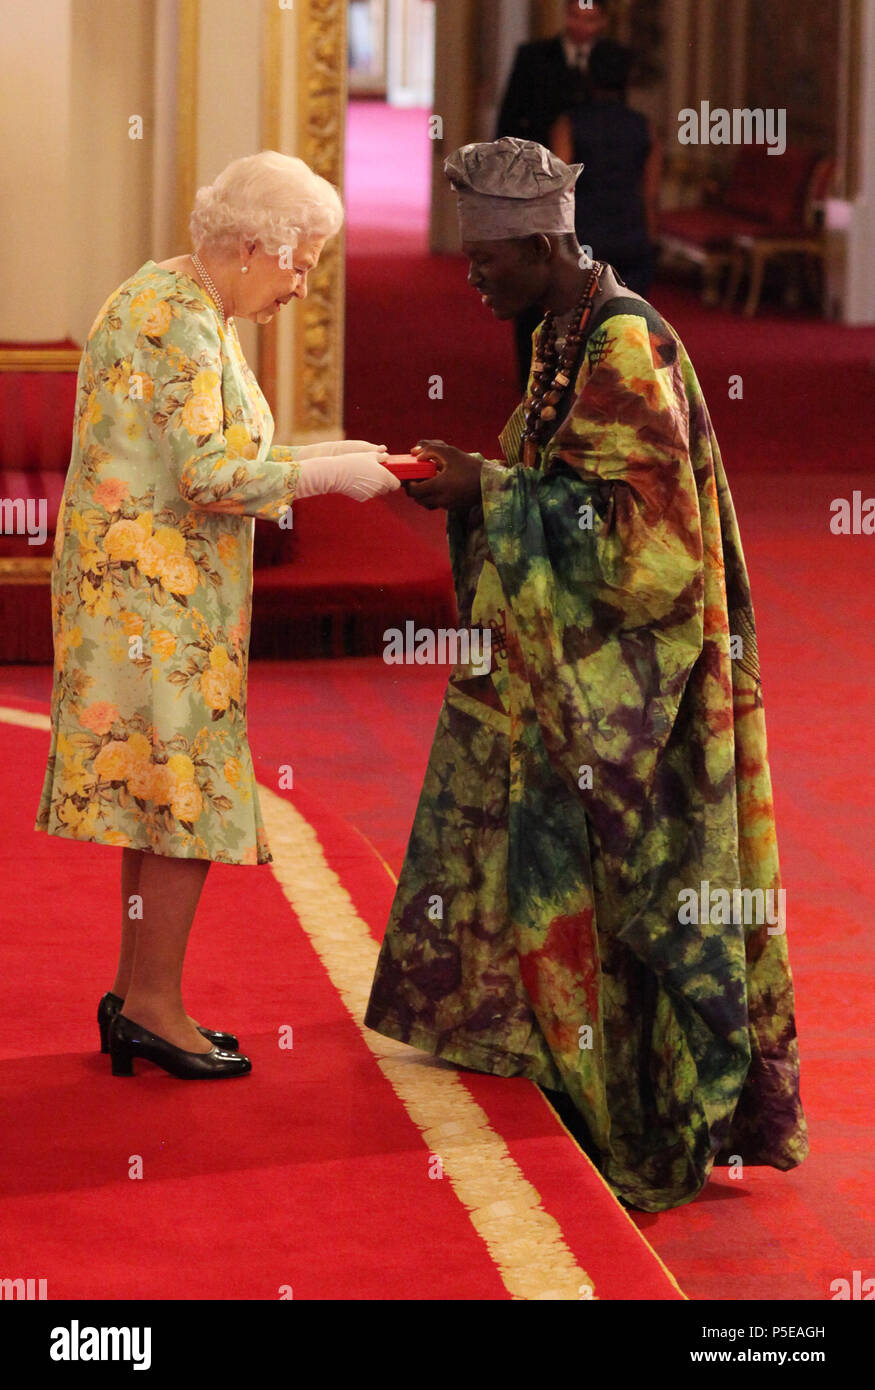 Mr. Brima Manso Bangura from Sierra Leone receives his Young Leaders Award from Queen Elizabeth II during a ceremony in the Ballroom at Buckingham Palace. Stock Photo